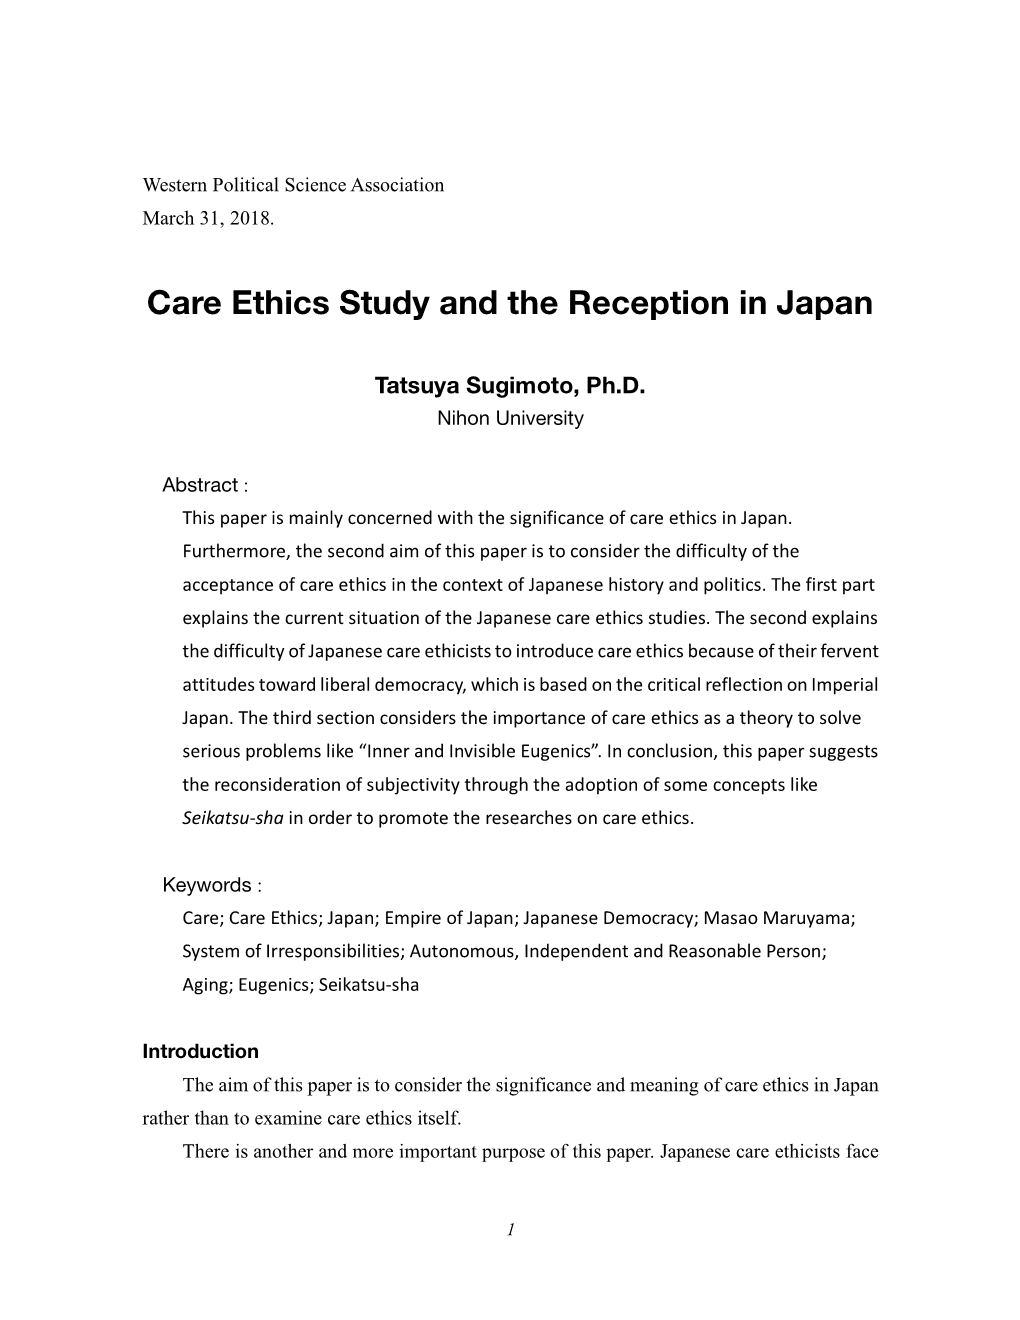 Care Ethics Study and the Reception in Japan